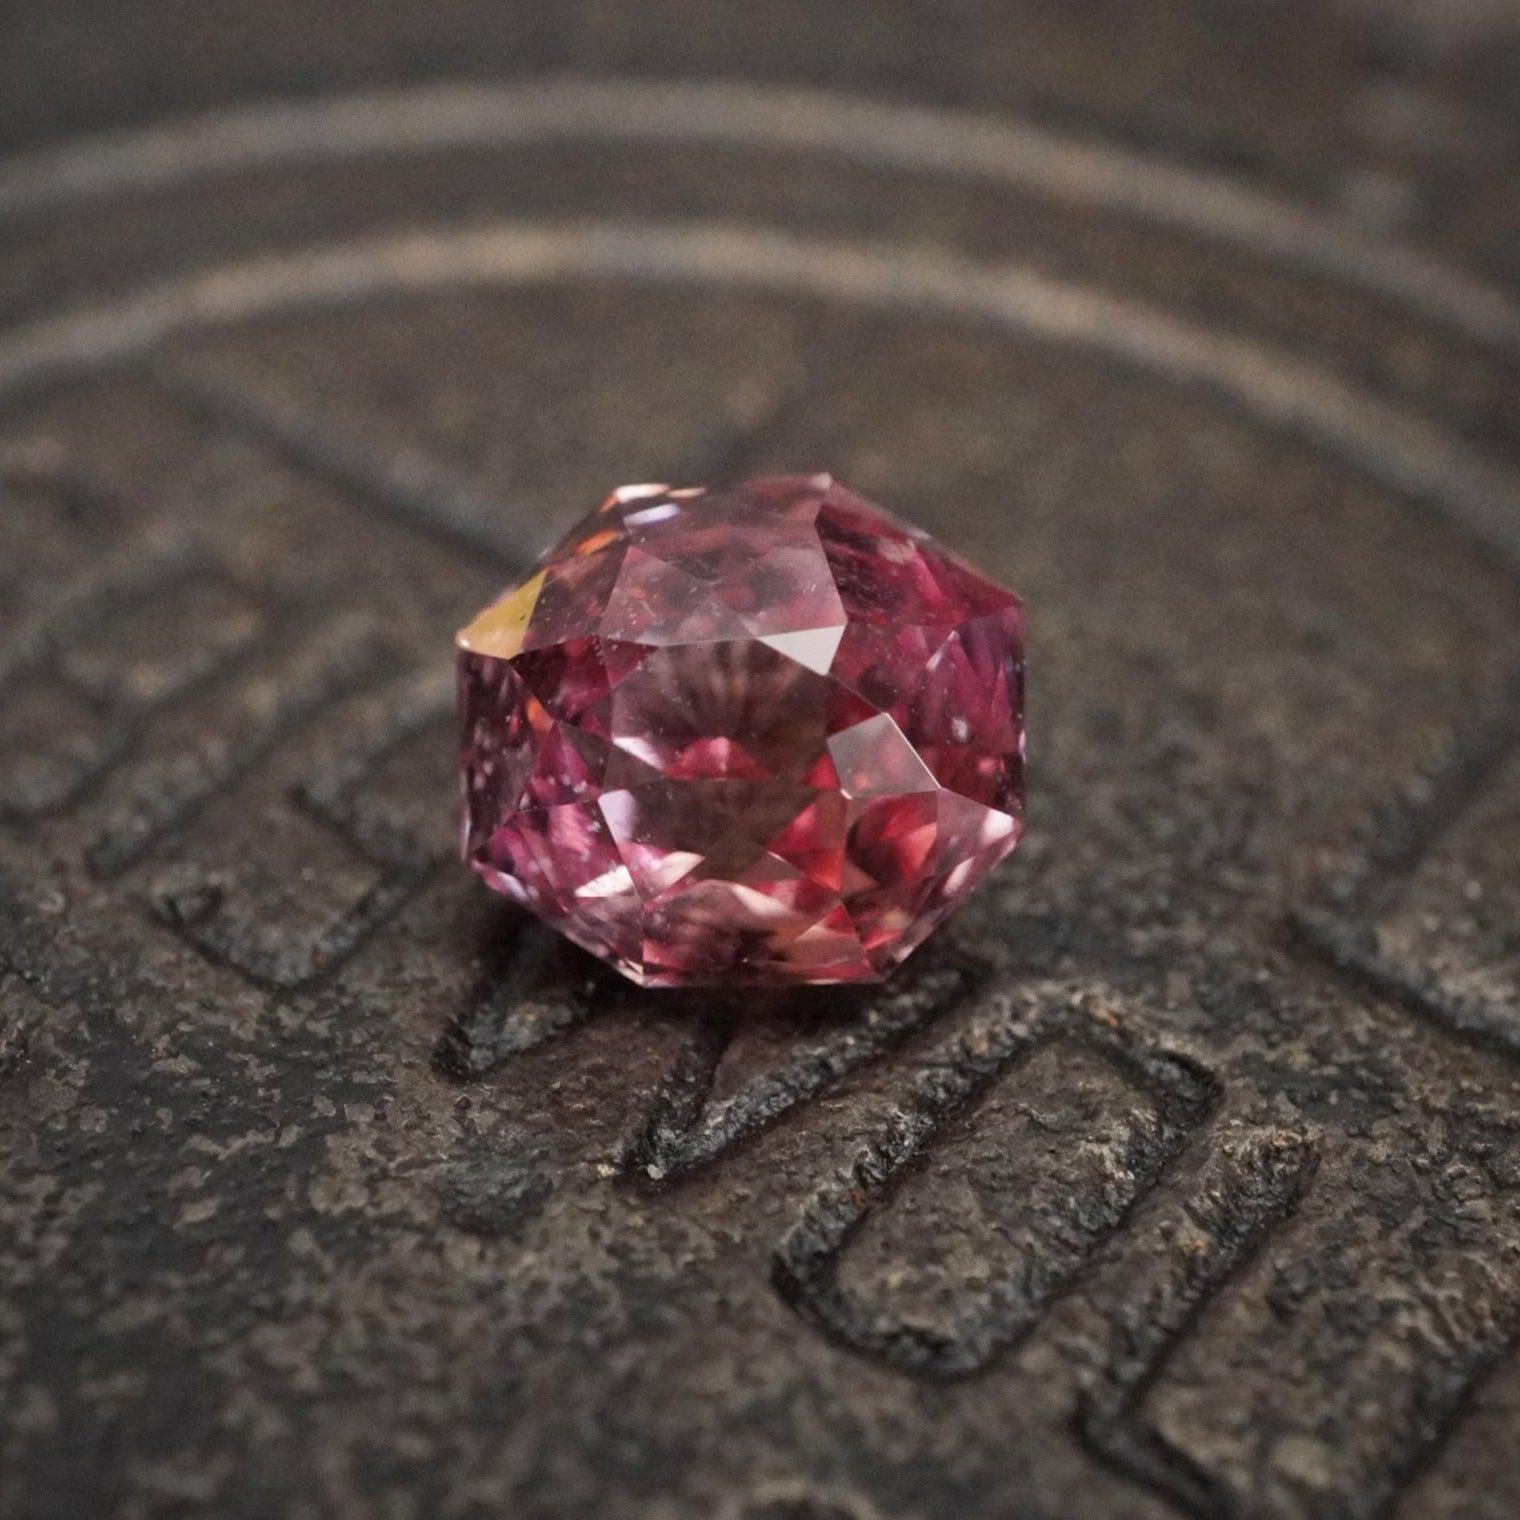 Discover this Enchanting 2.56 Carat Padparadscha Sapphire!